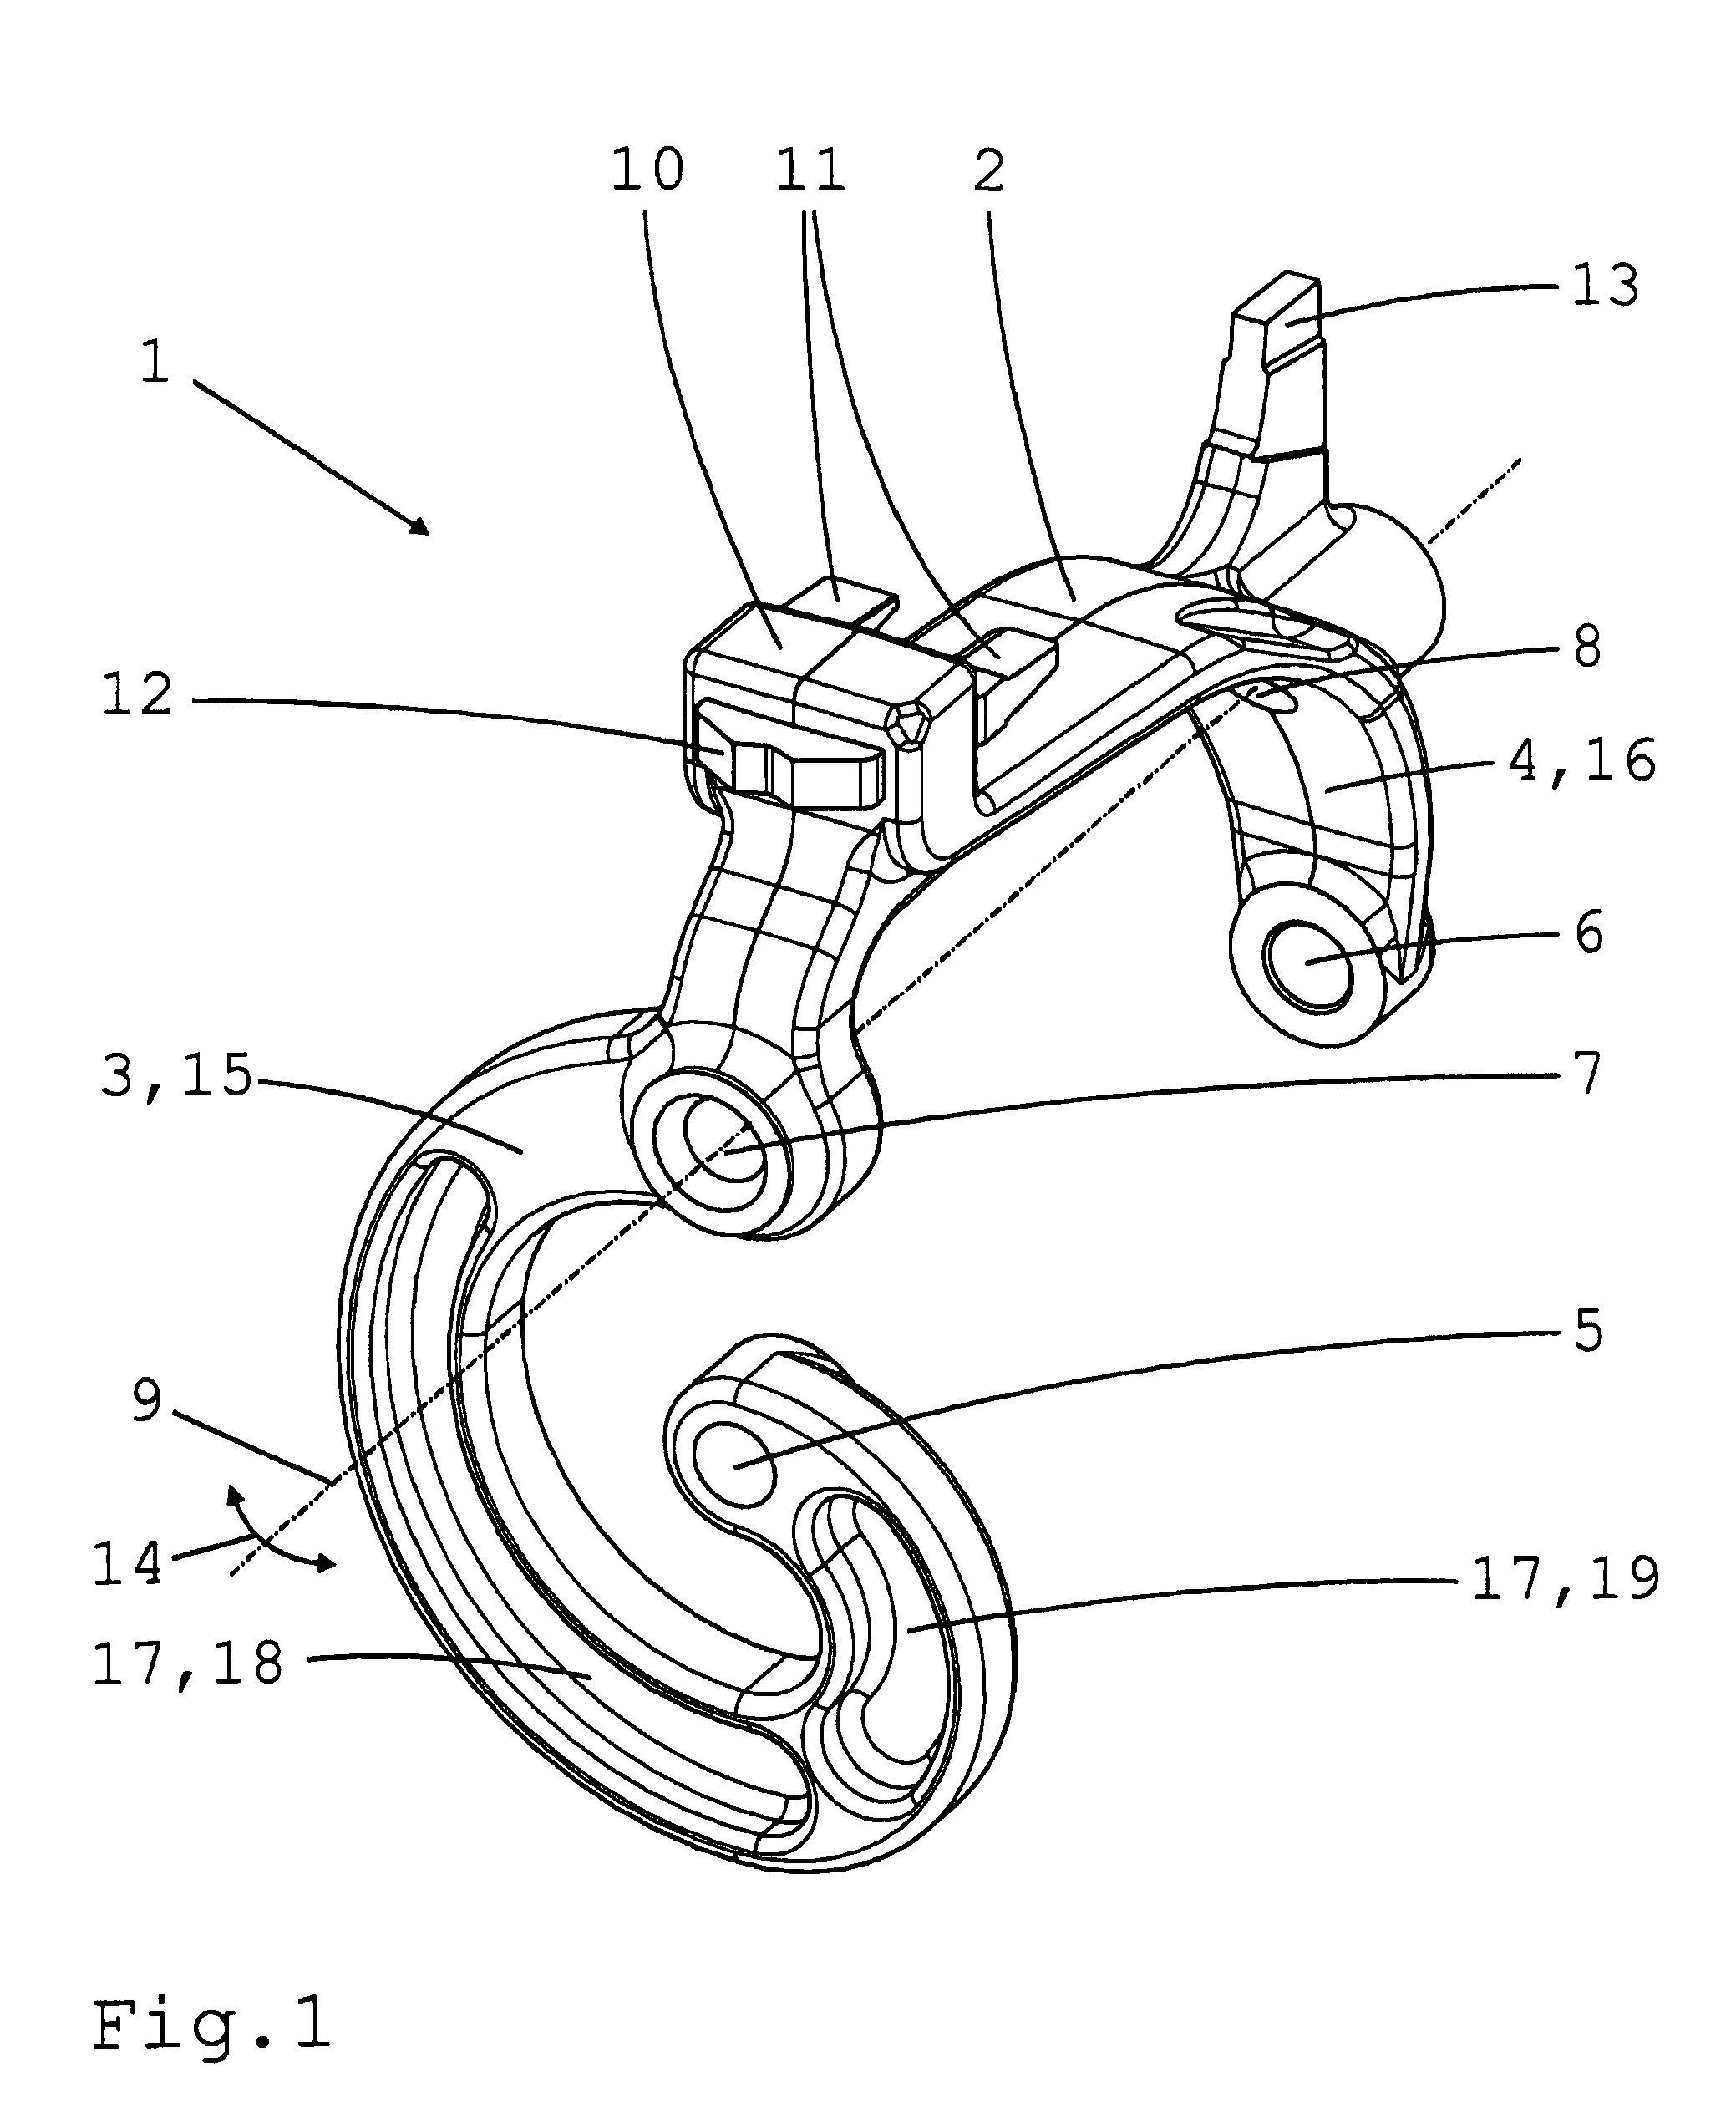 Shifting device for a manual transmission